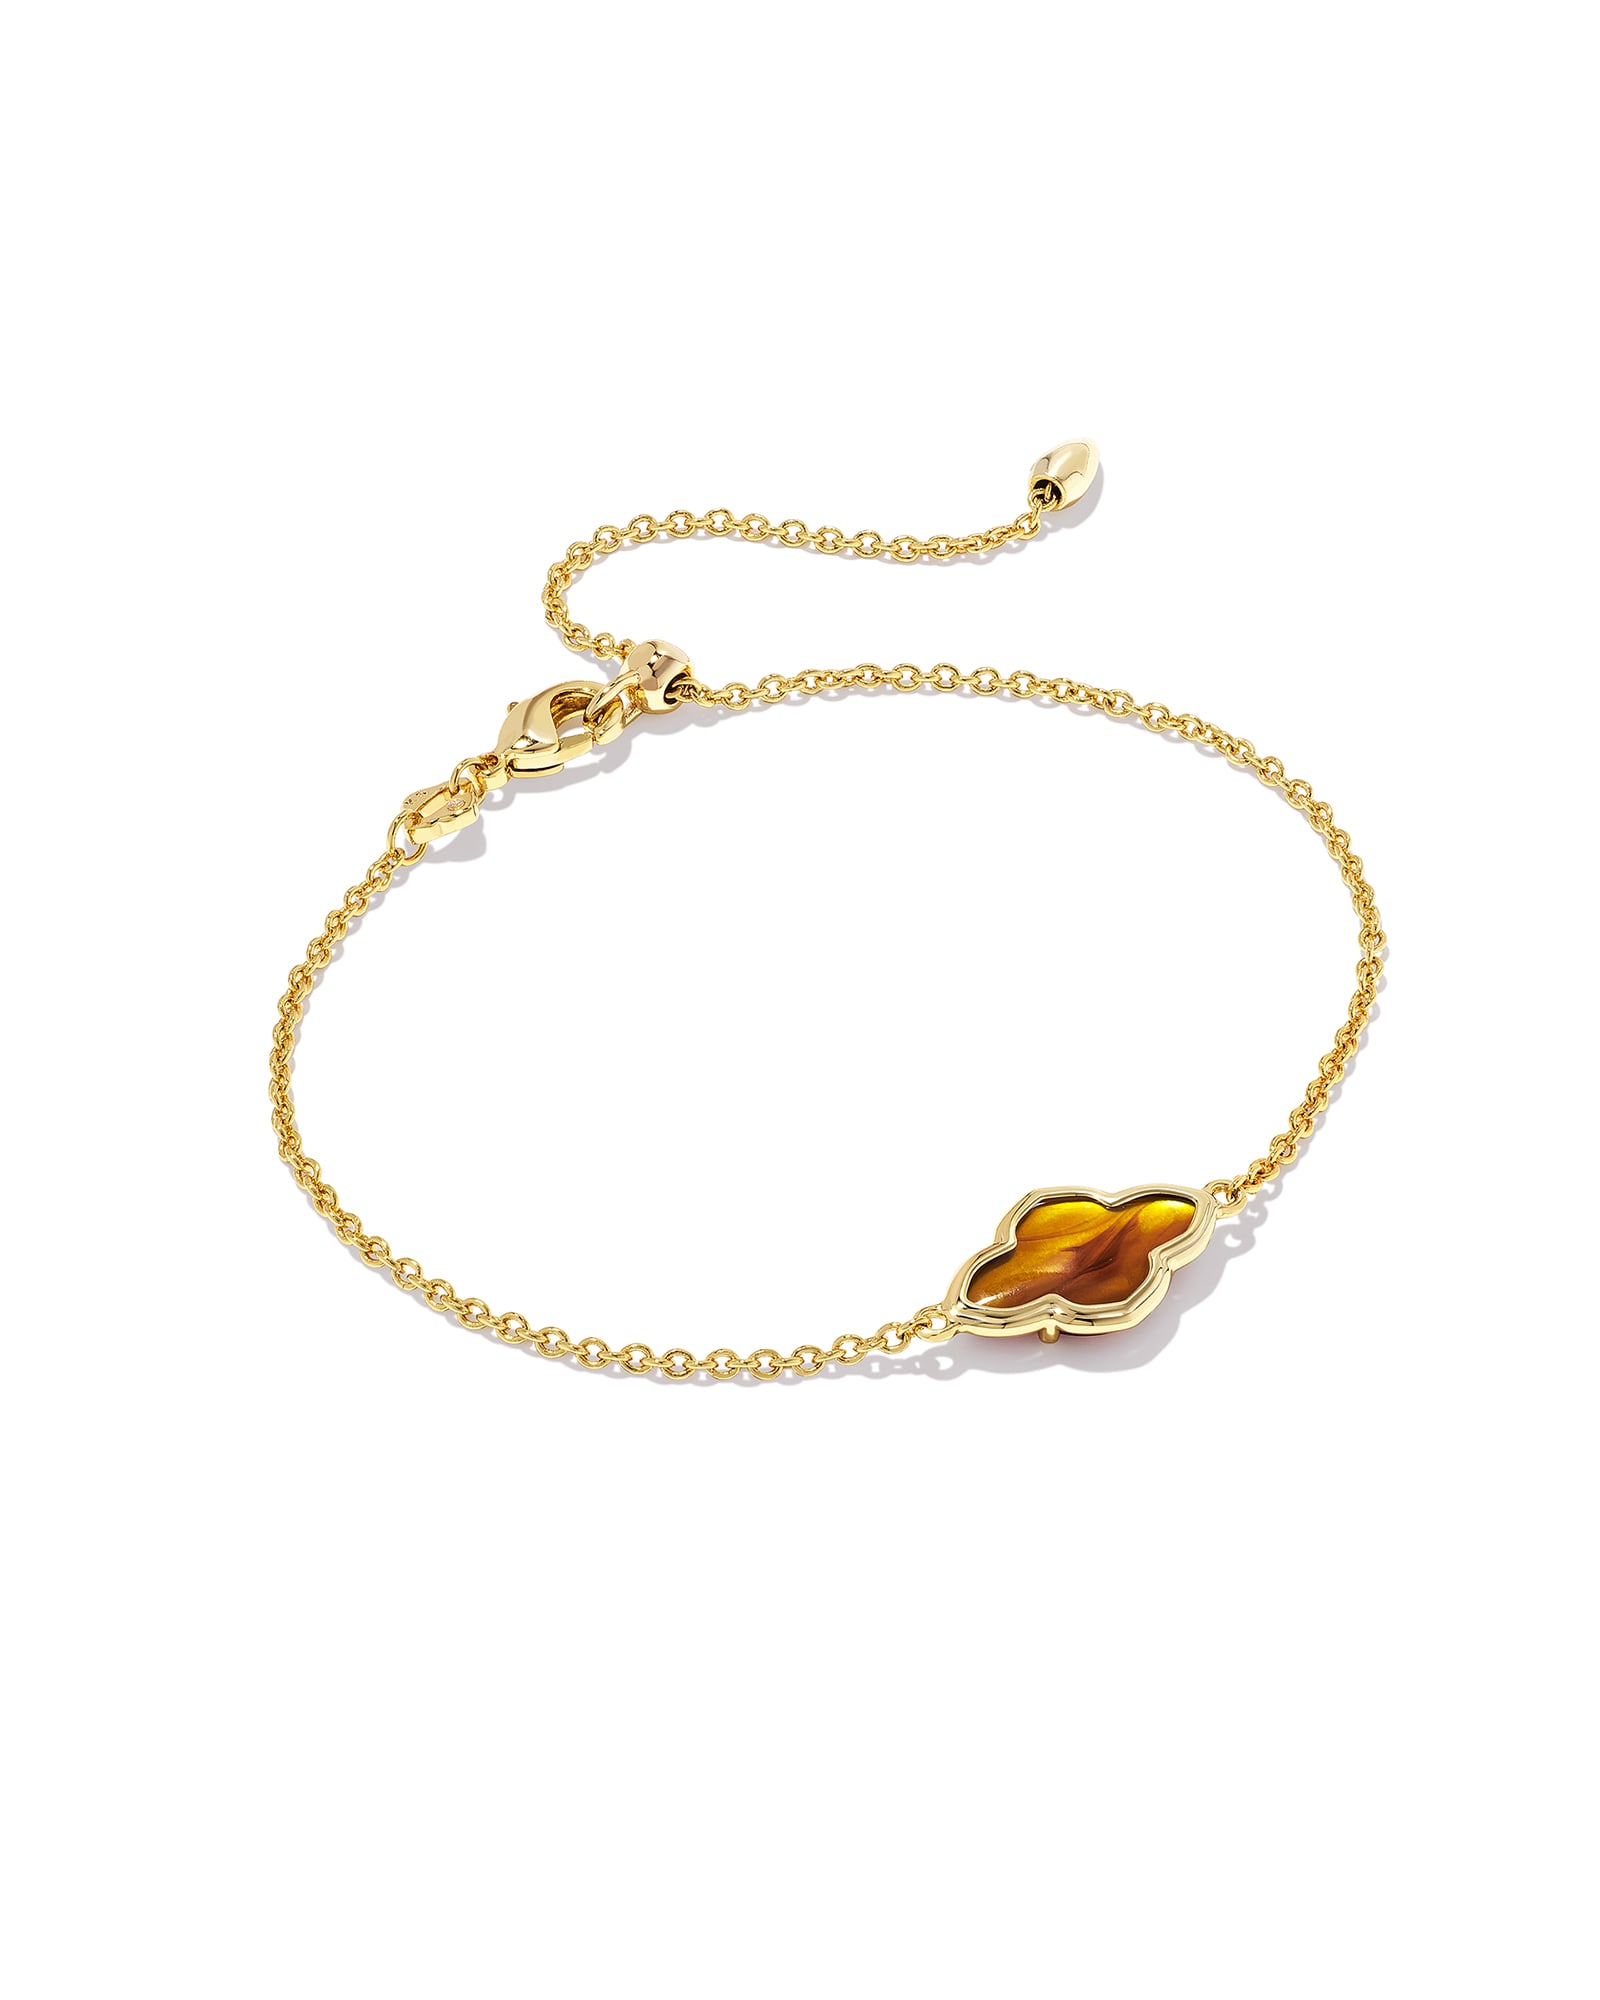 Framed Abbie Gold Delicate Chain Bracelet in Marbled Amber Illusion | Kendra Scott